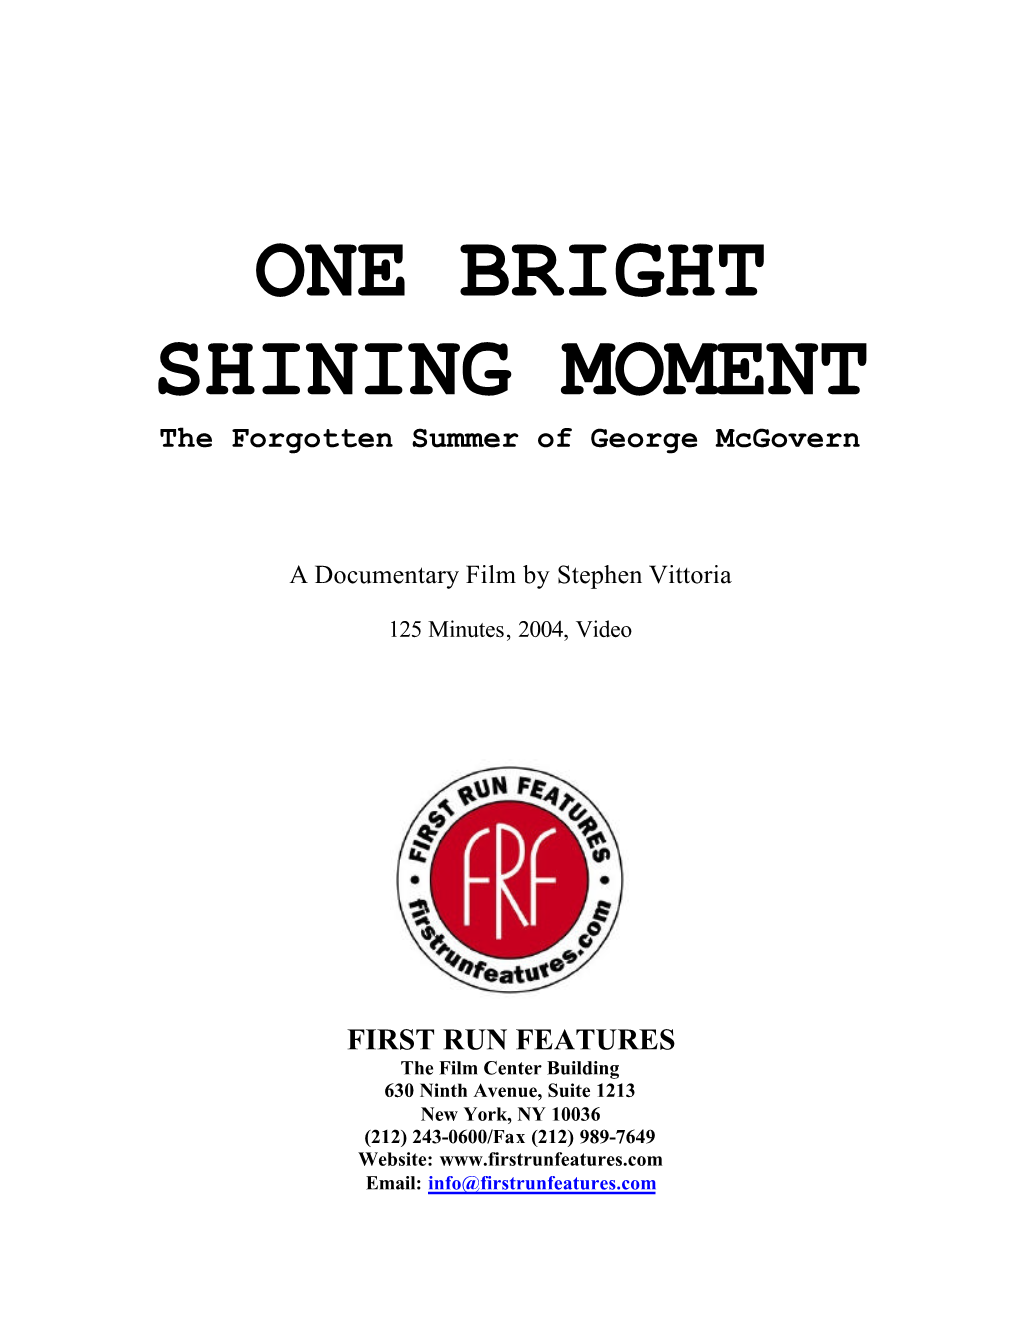 ONE BRIGHT SHINING MOMENT the Forgotten Summer of George Mcgovern